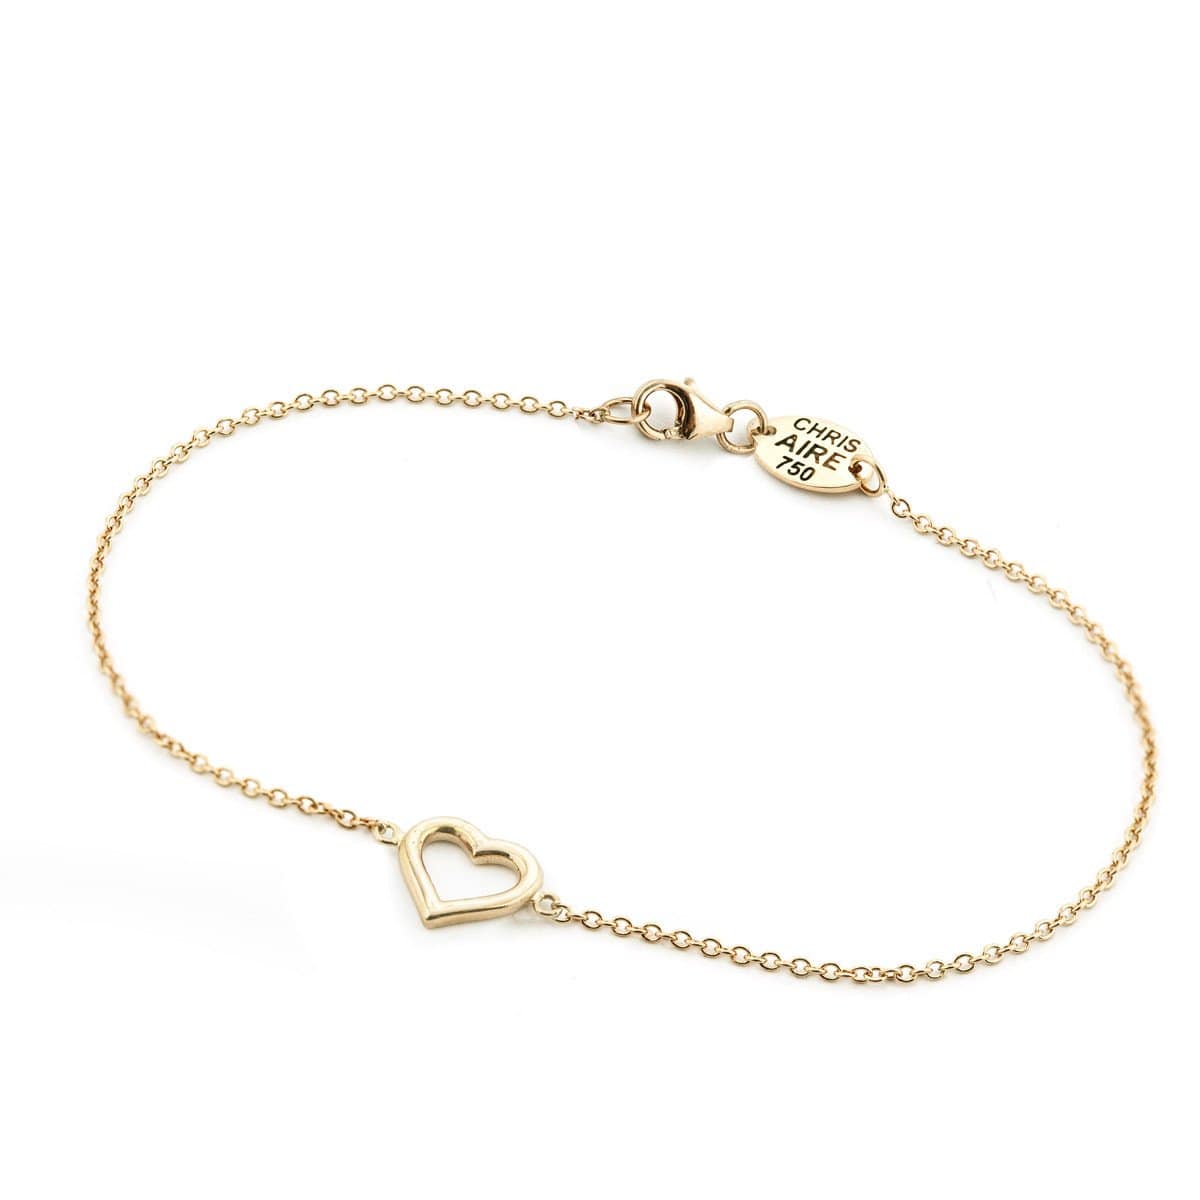 YELLOW GOLD HEART BRACELET - Chris Aire Fine Jewelry & Timepieces